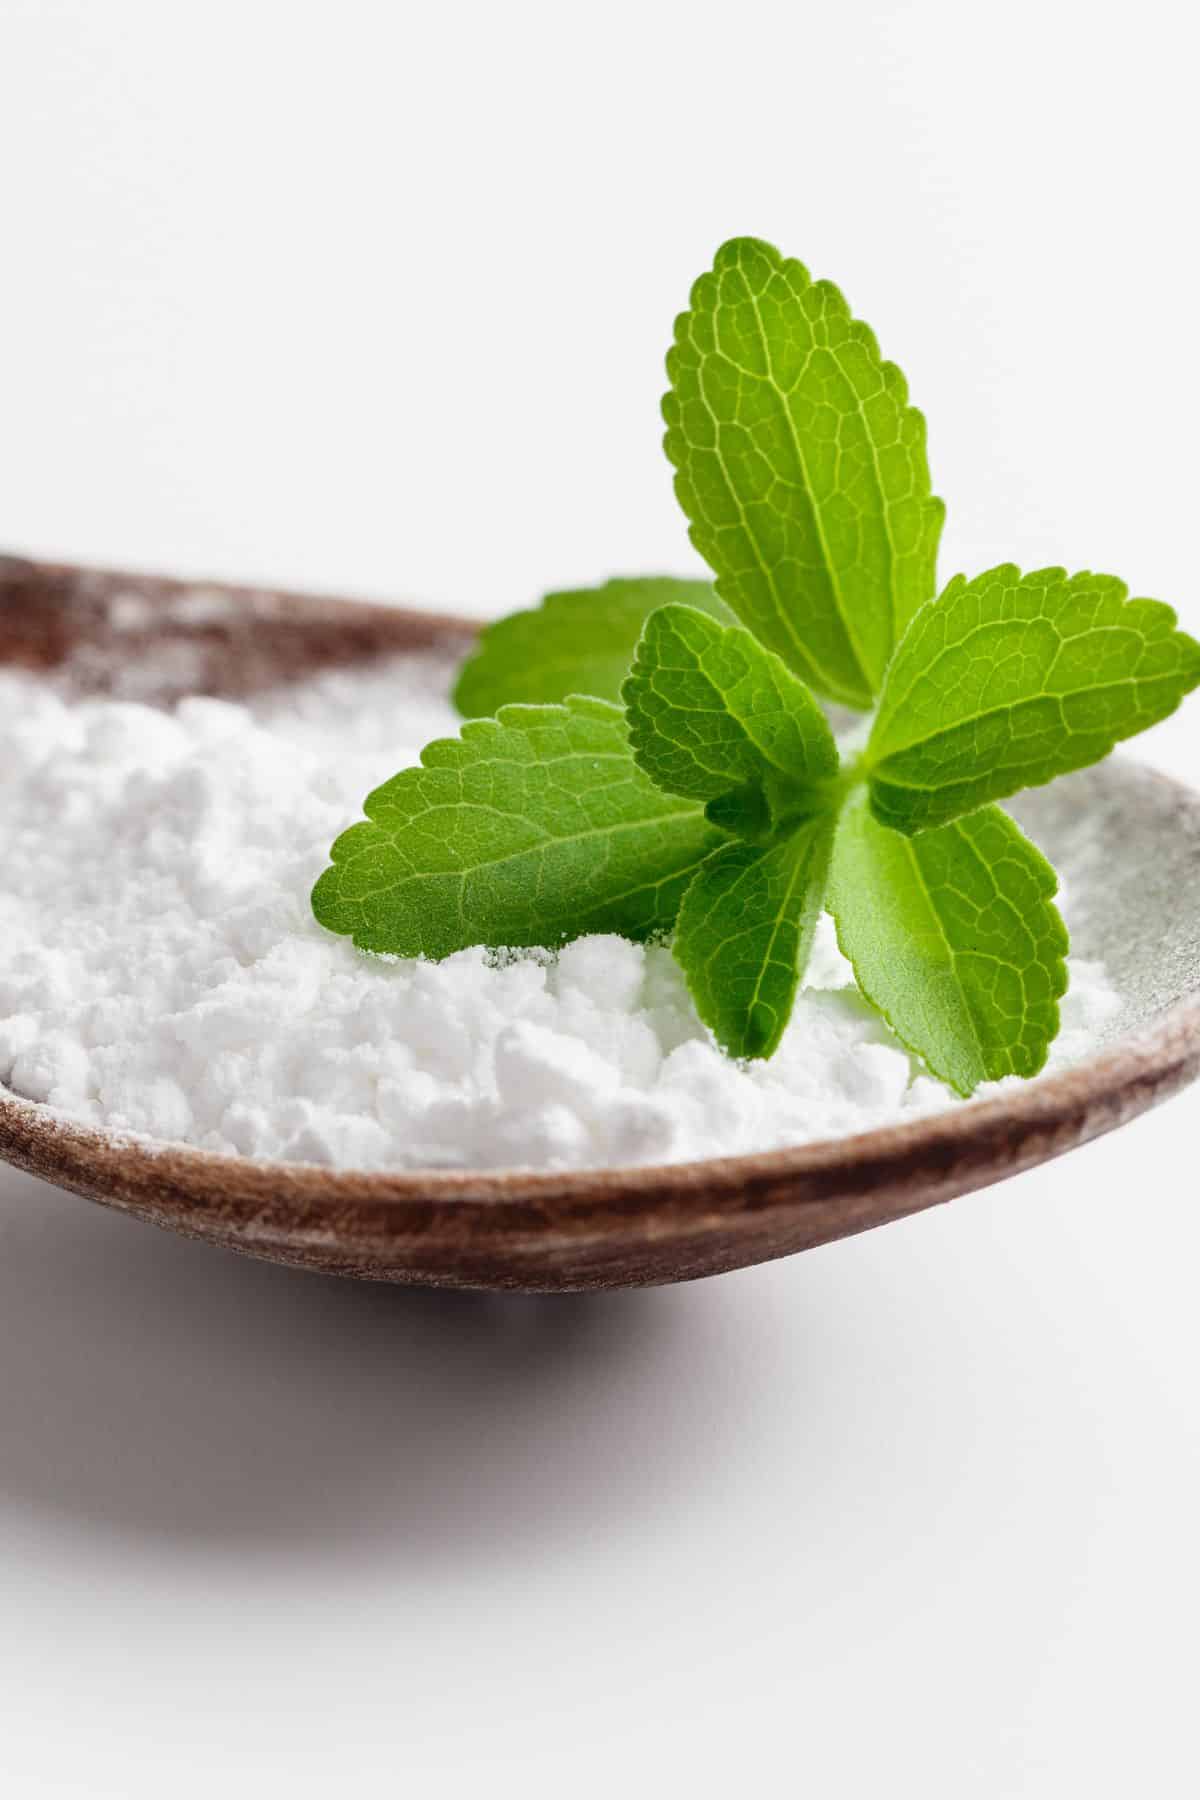 powdered stevia in a wooden spoon topped with a stevia leaf.